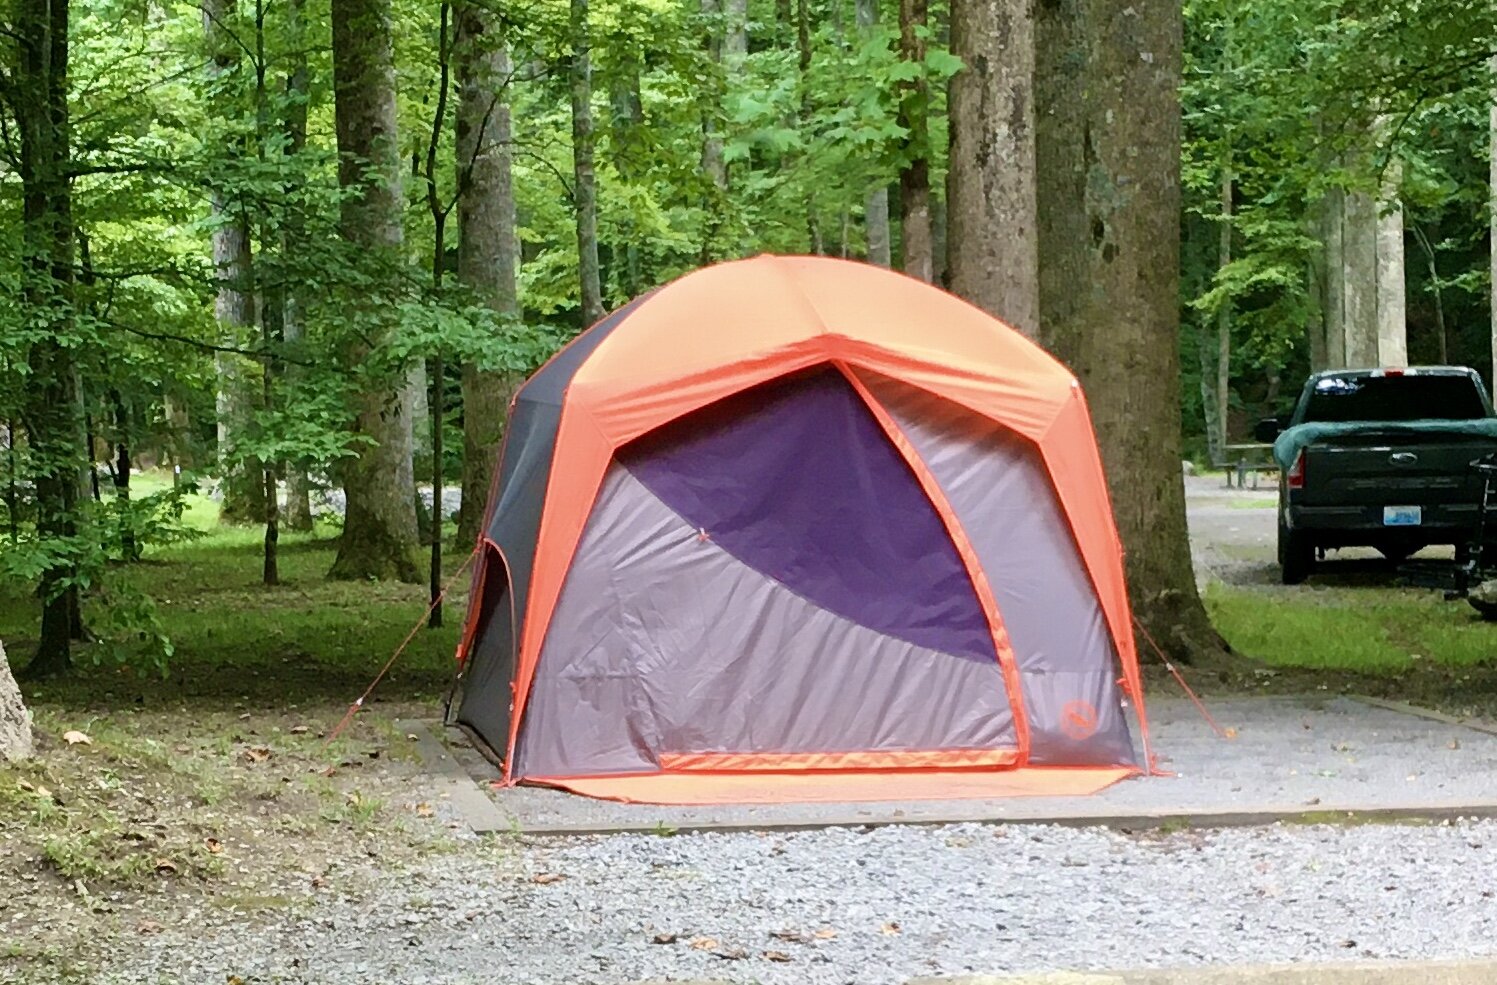 6-personne instantané cabine tente avec DEL Lighted Hub Summer family camping aventure 